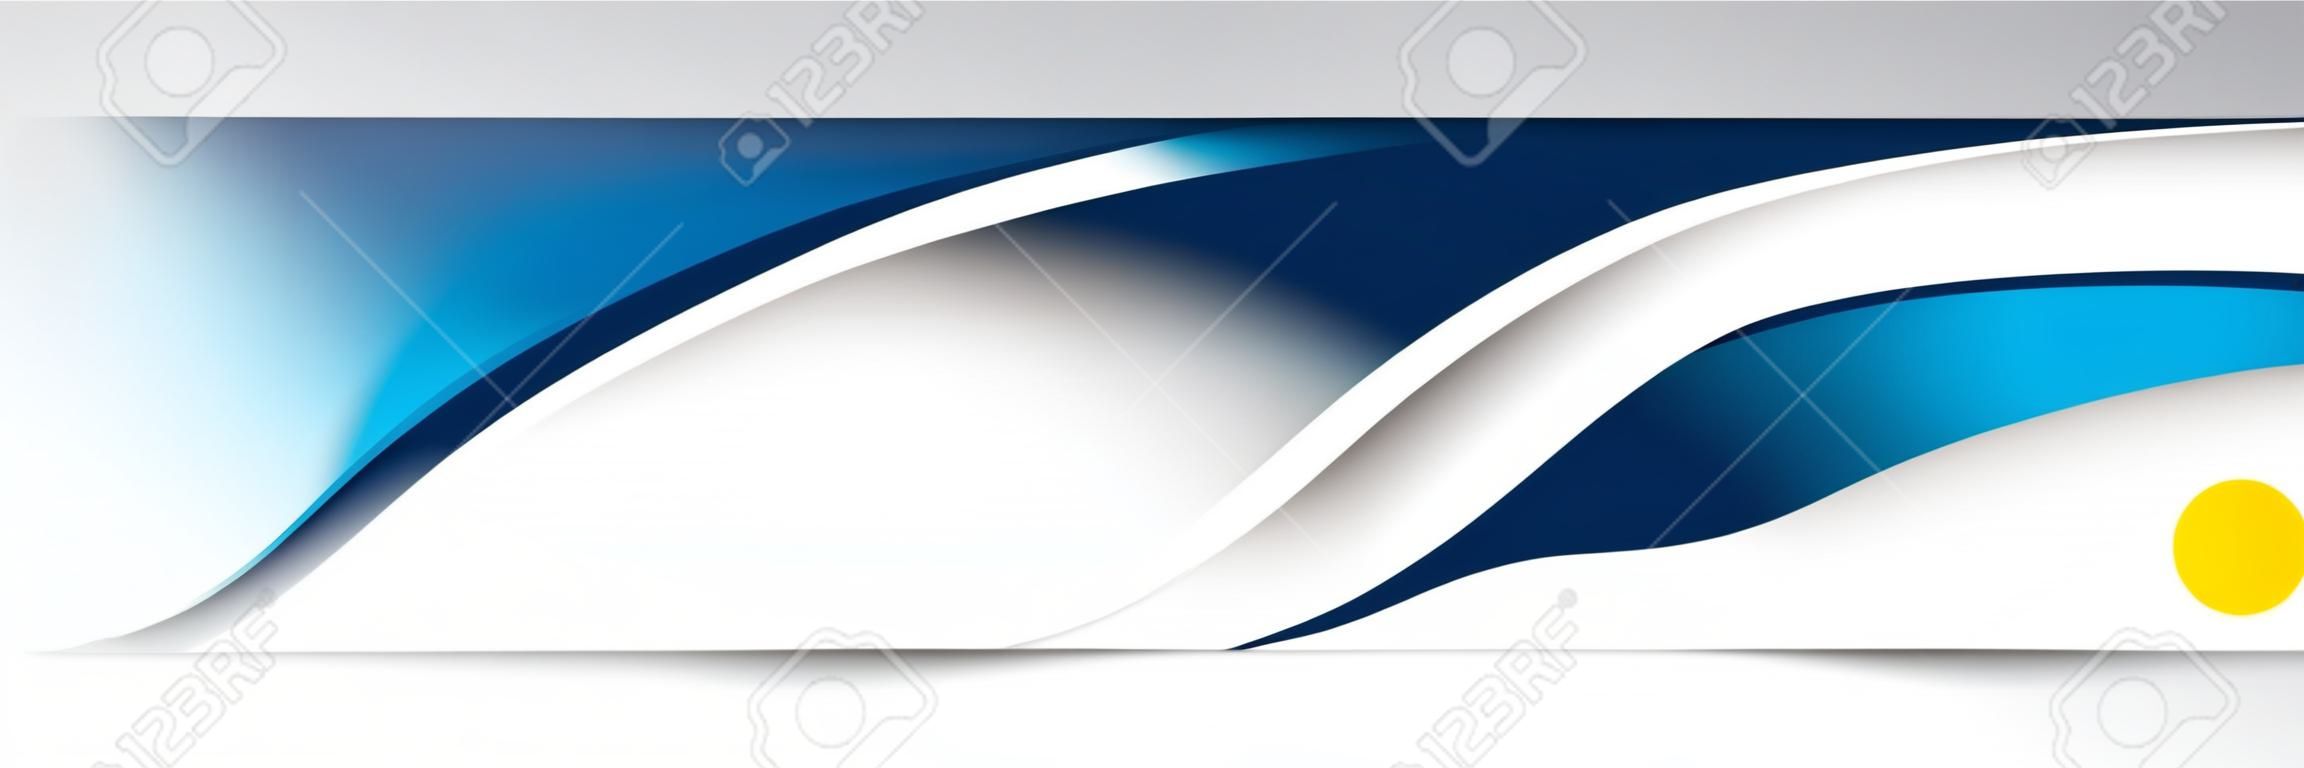 Abstract Blue Curve Header Design Background Vector Image